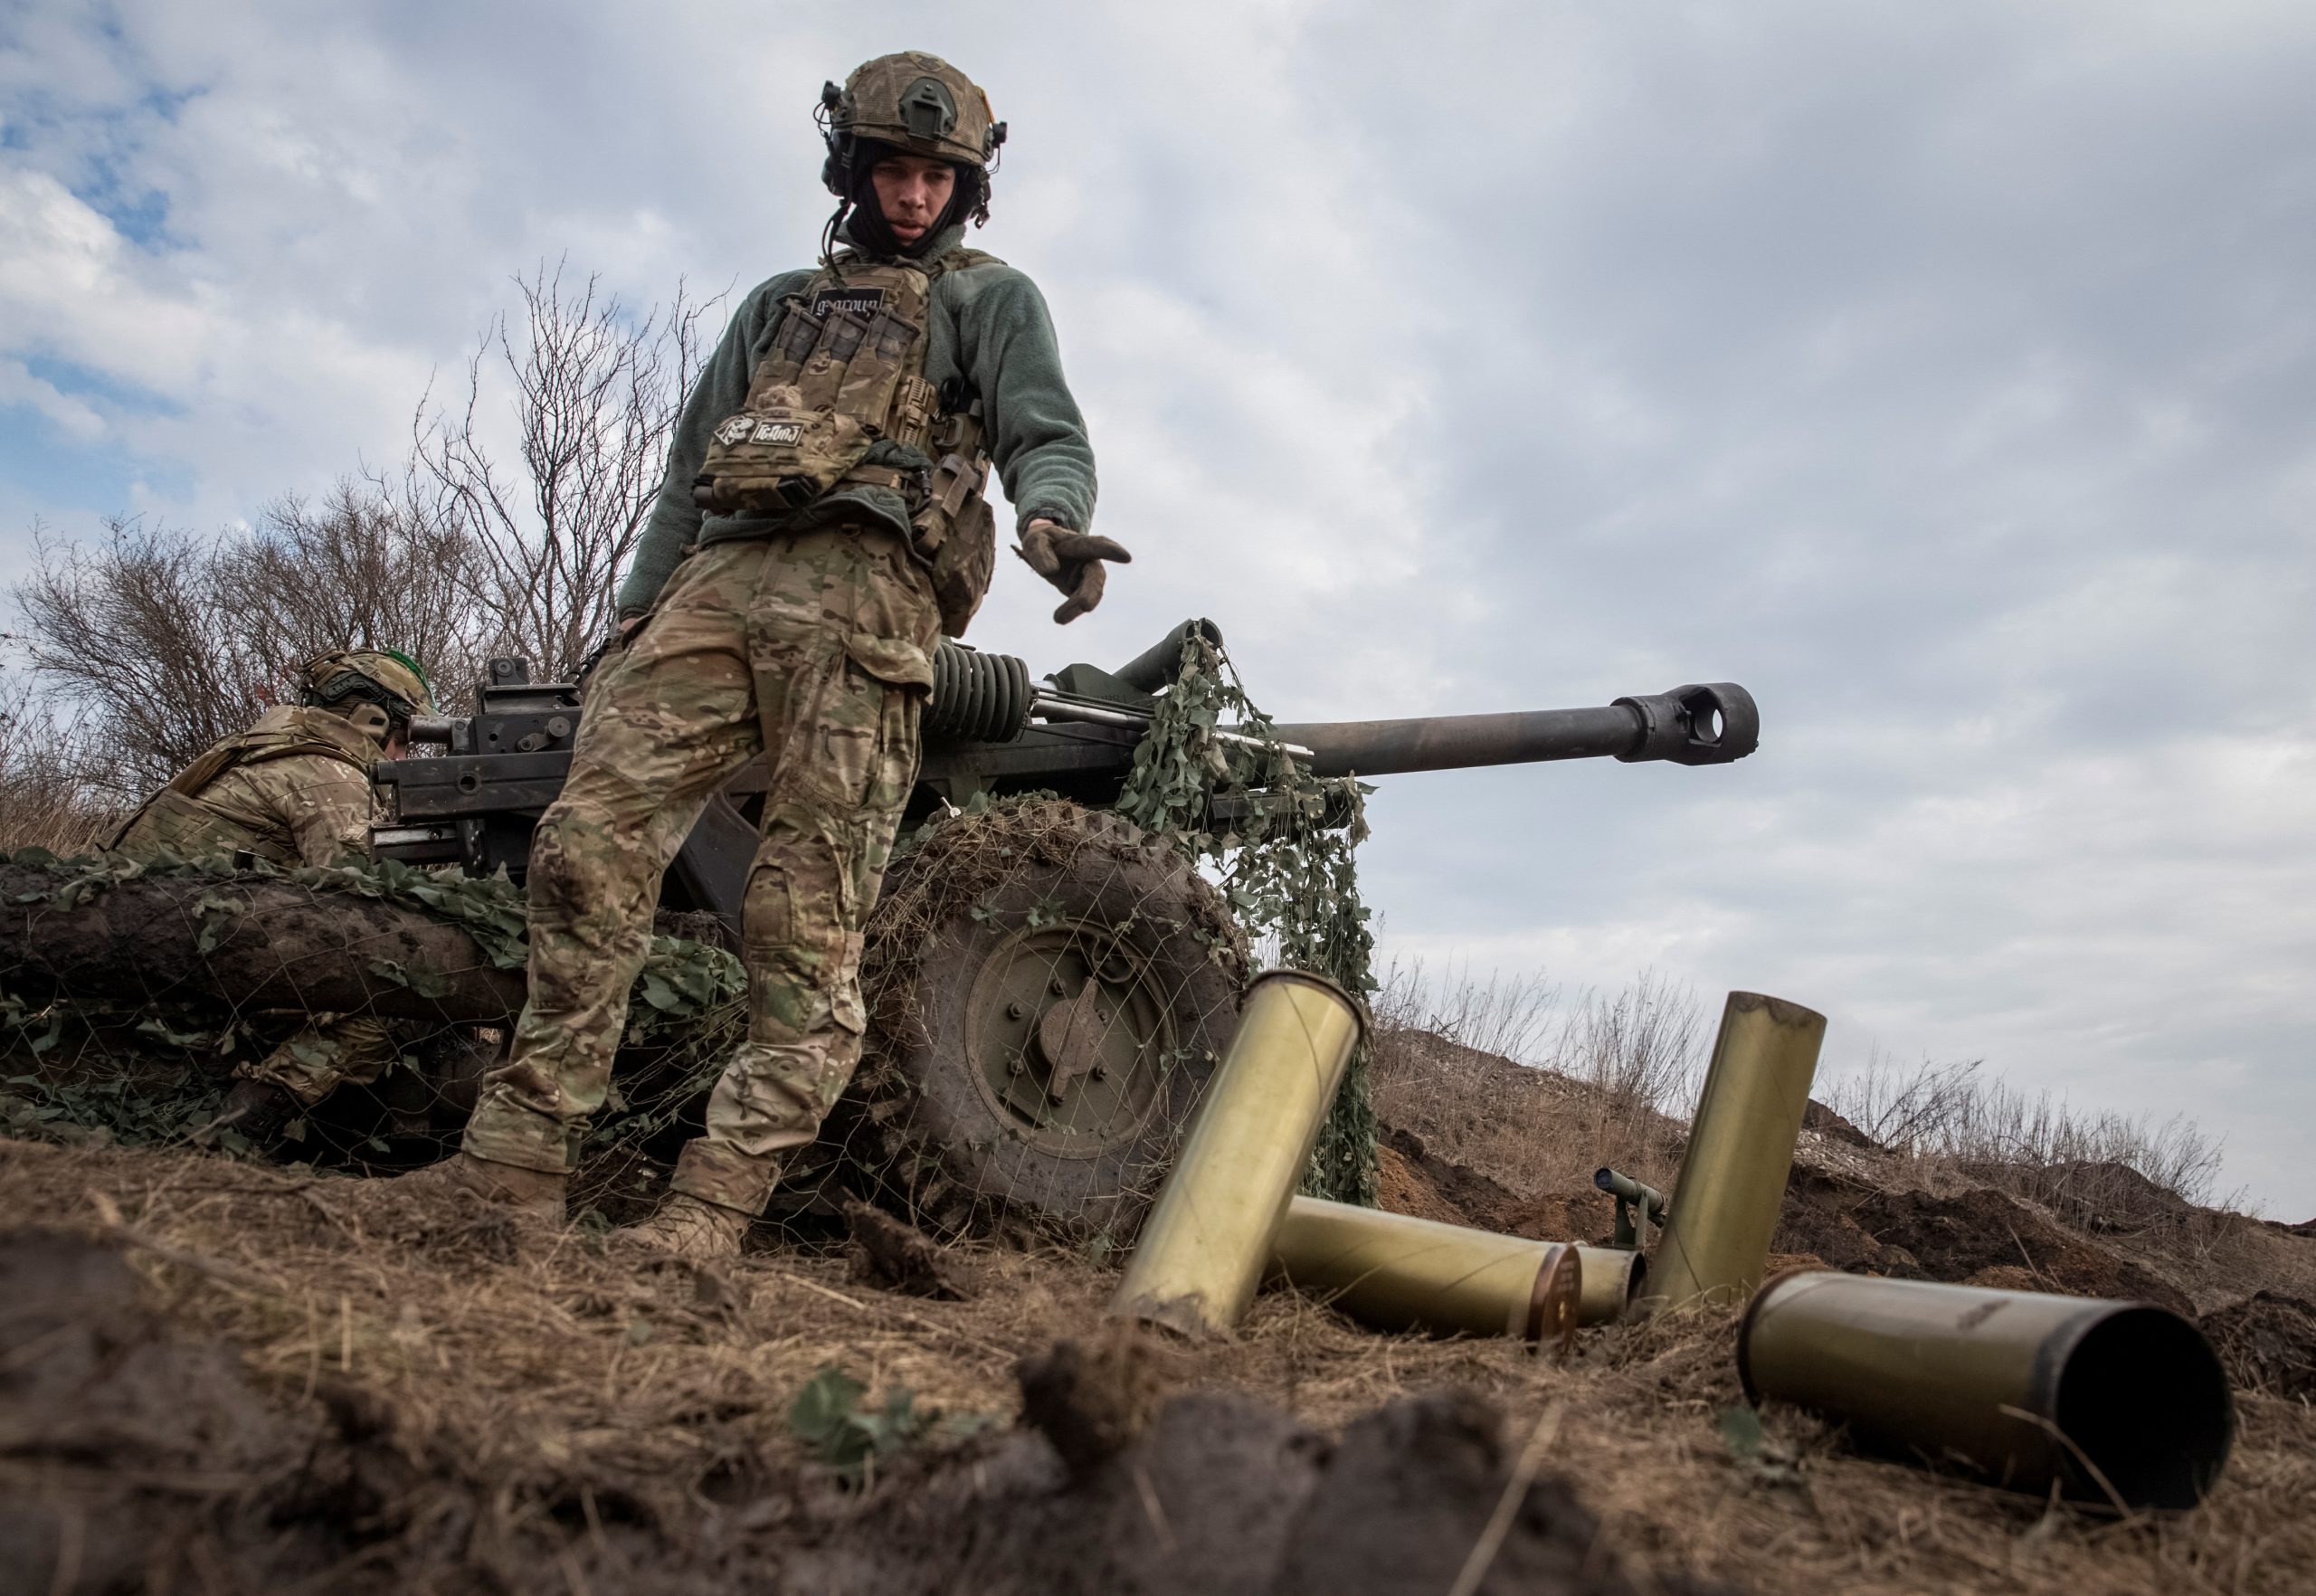 Ukrainian service members from a battalion, named of nom-de-guerre of their commander 'Da Vinci', Hero of Ukraine, who was killed in a fight against Russian troops, fire a howitzer M119 at a front line, amid Russia's attack on Ukraine, near the city of Bakhmut, Ukraine March 10, 2023. REUTERS/Oleksandr Ratushniak bakhmut